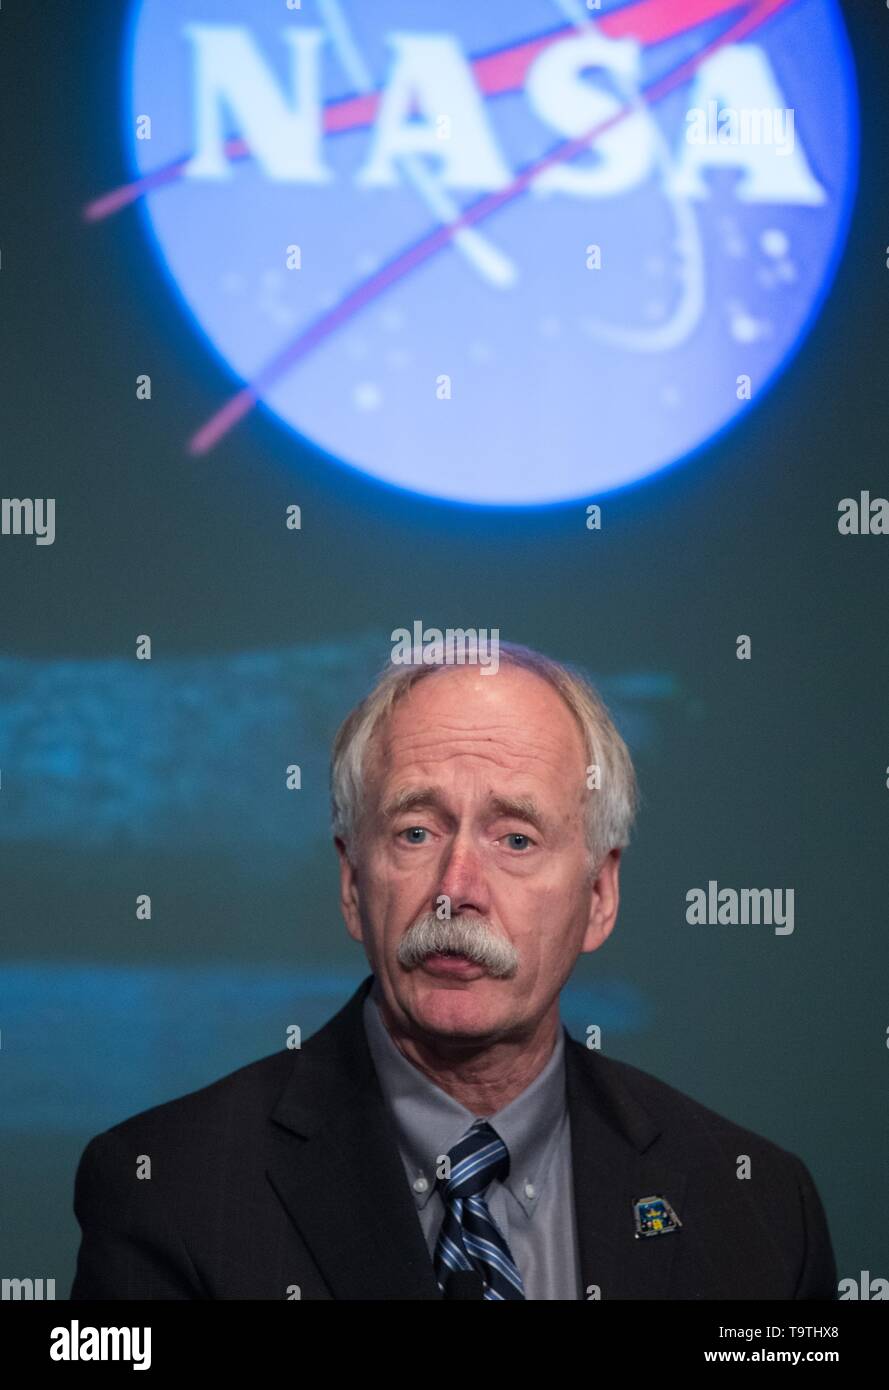 NASA Associate Administrator for Human Exploration and Operations William Gerstenmaier during a NASA town hall discussion plans to land astronauts on the Moon by 2024 at NASA Headquarters May 14, 2019 in Washington, DC. Stock Photo